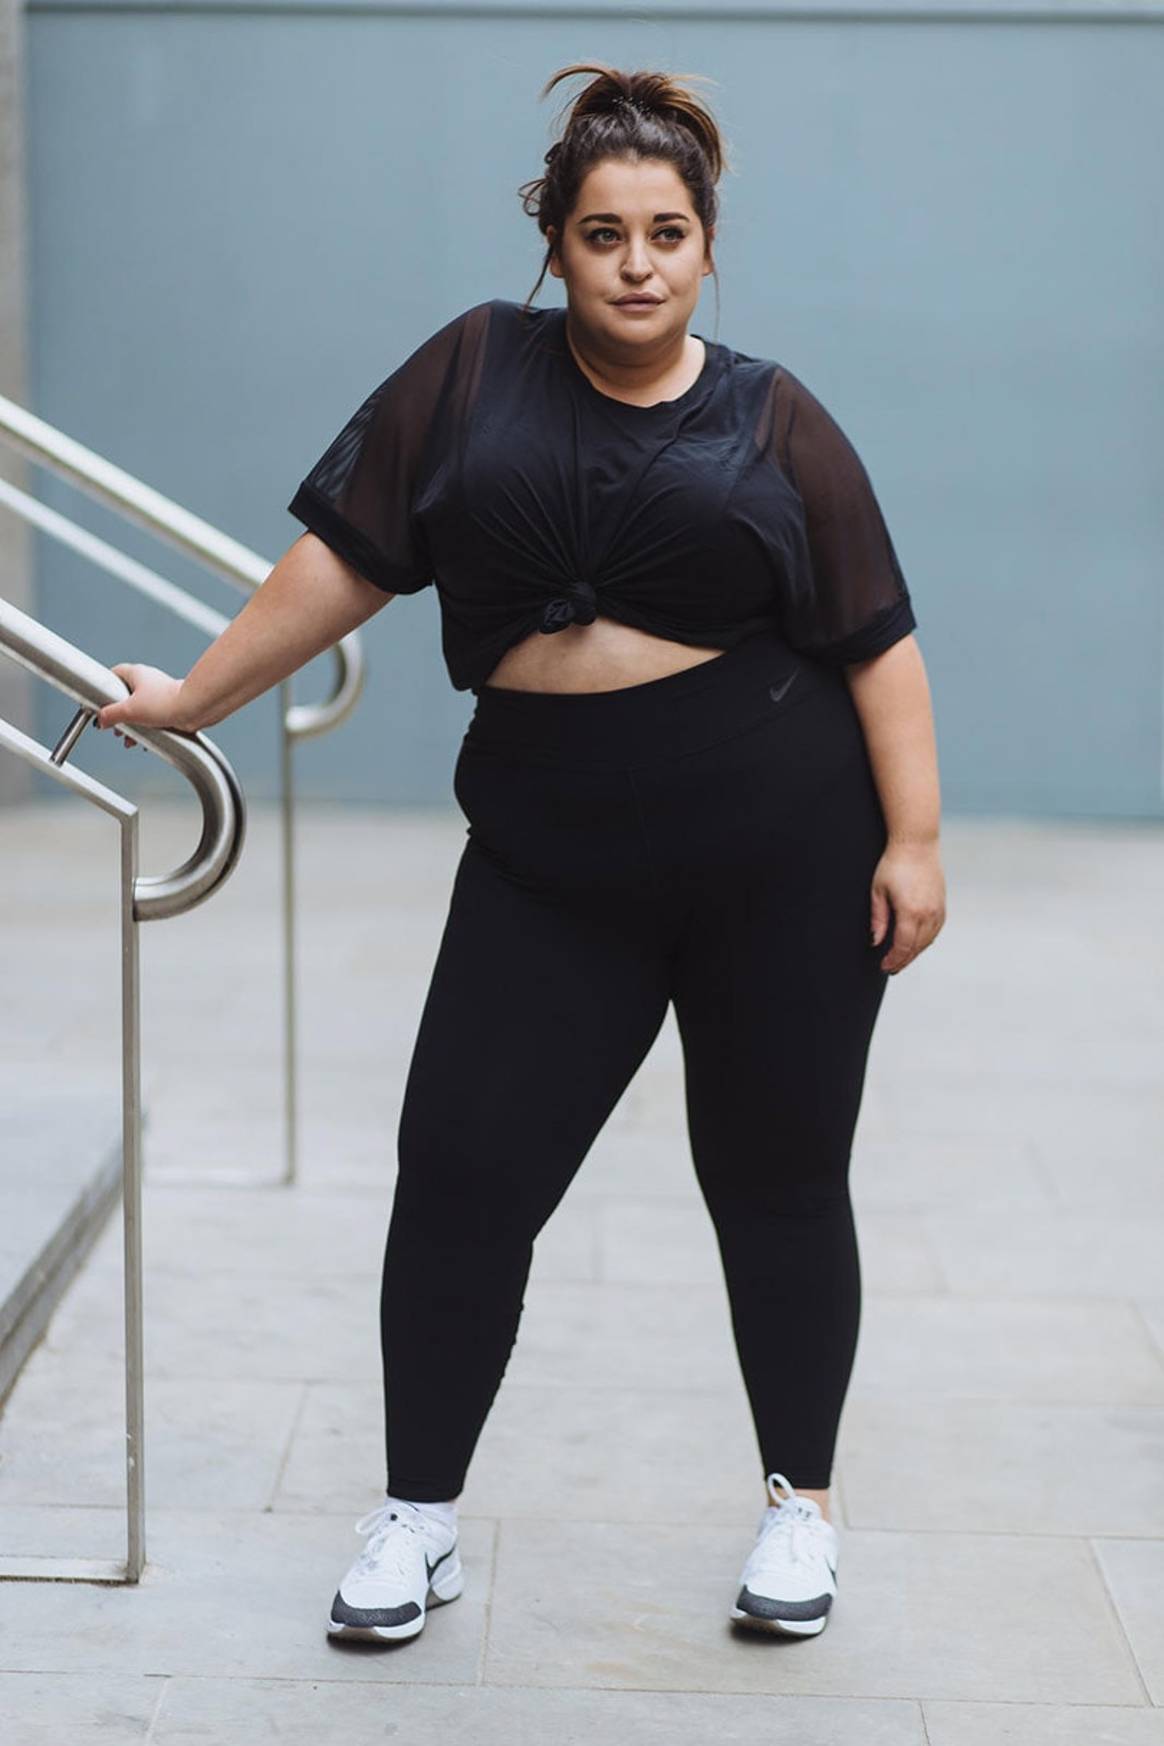 In Pictures: Nike's first plus-size range